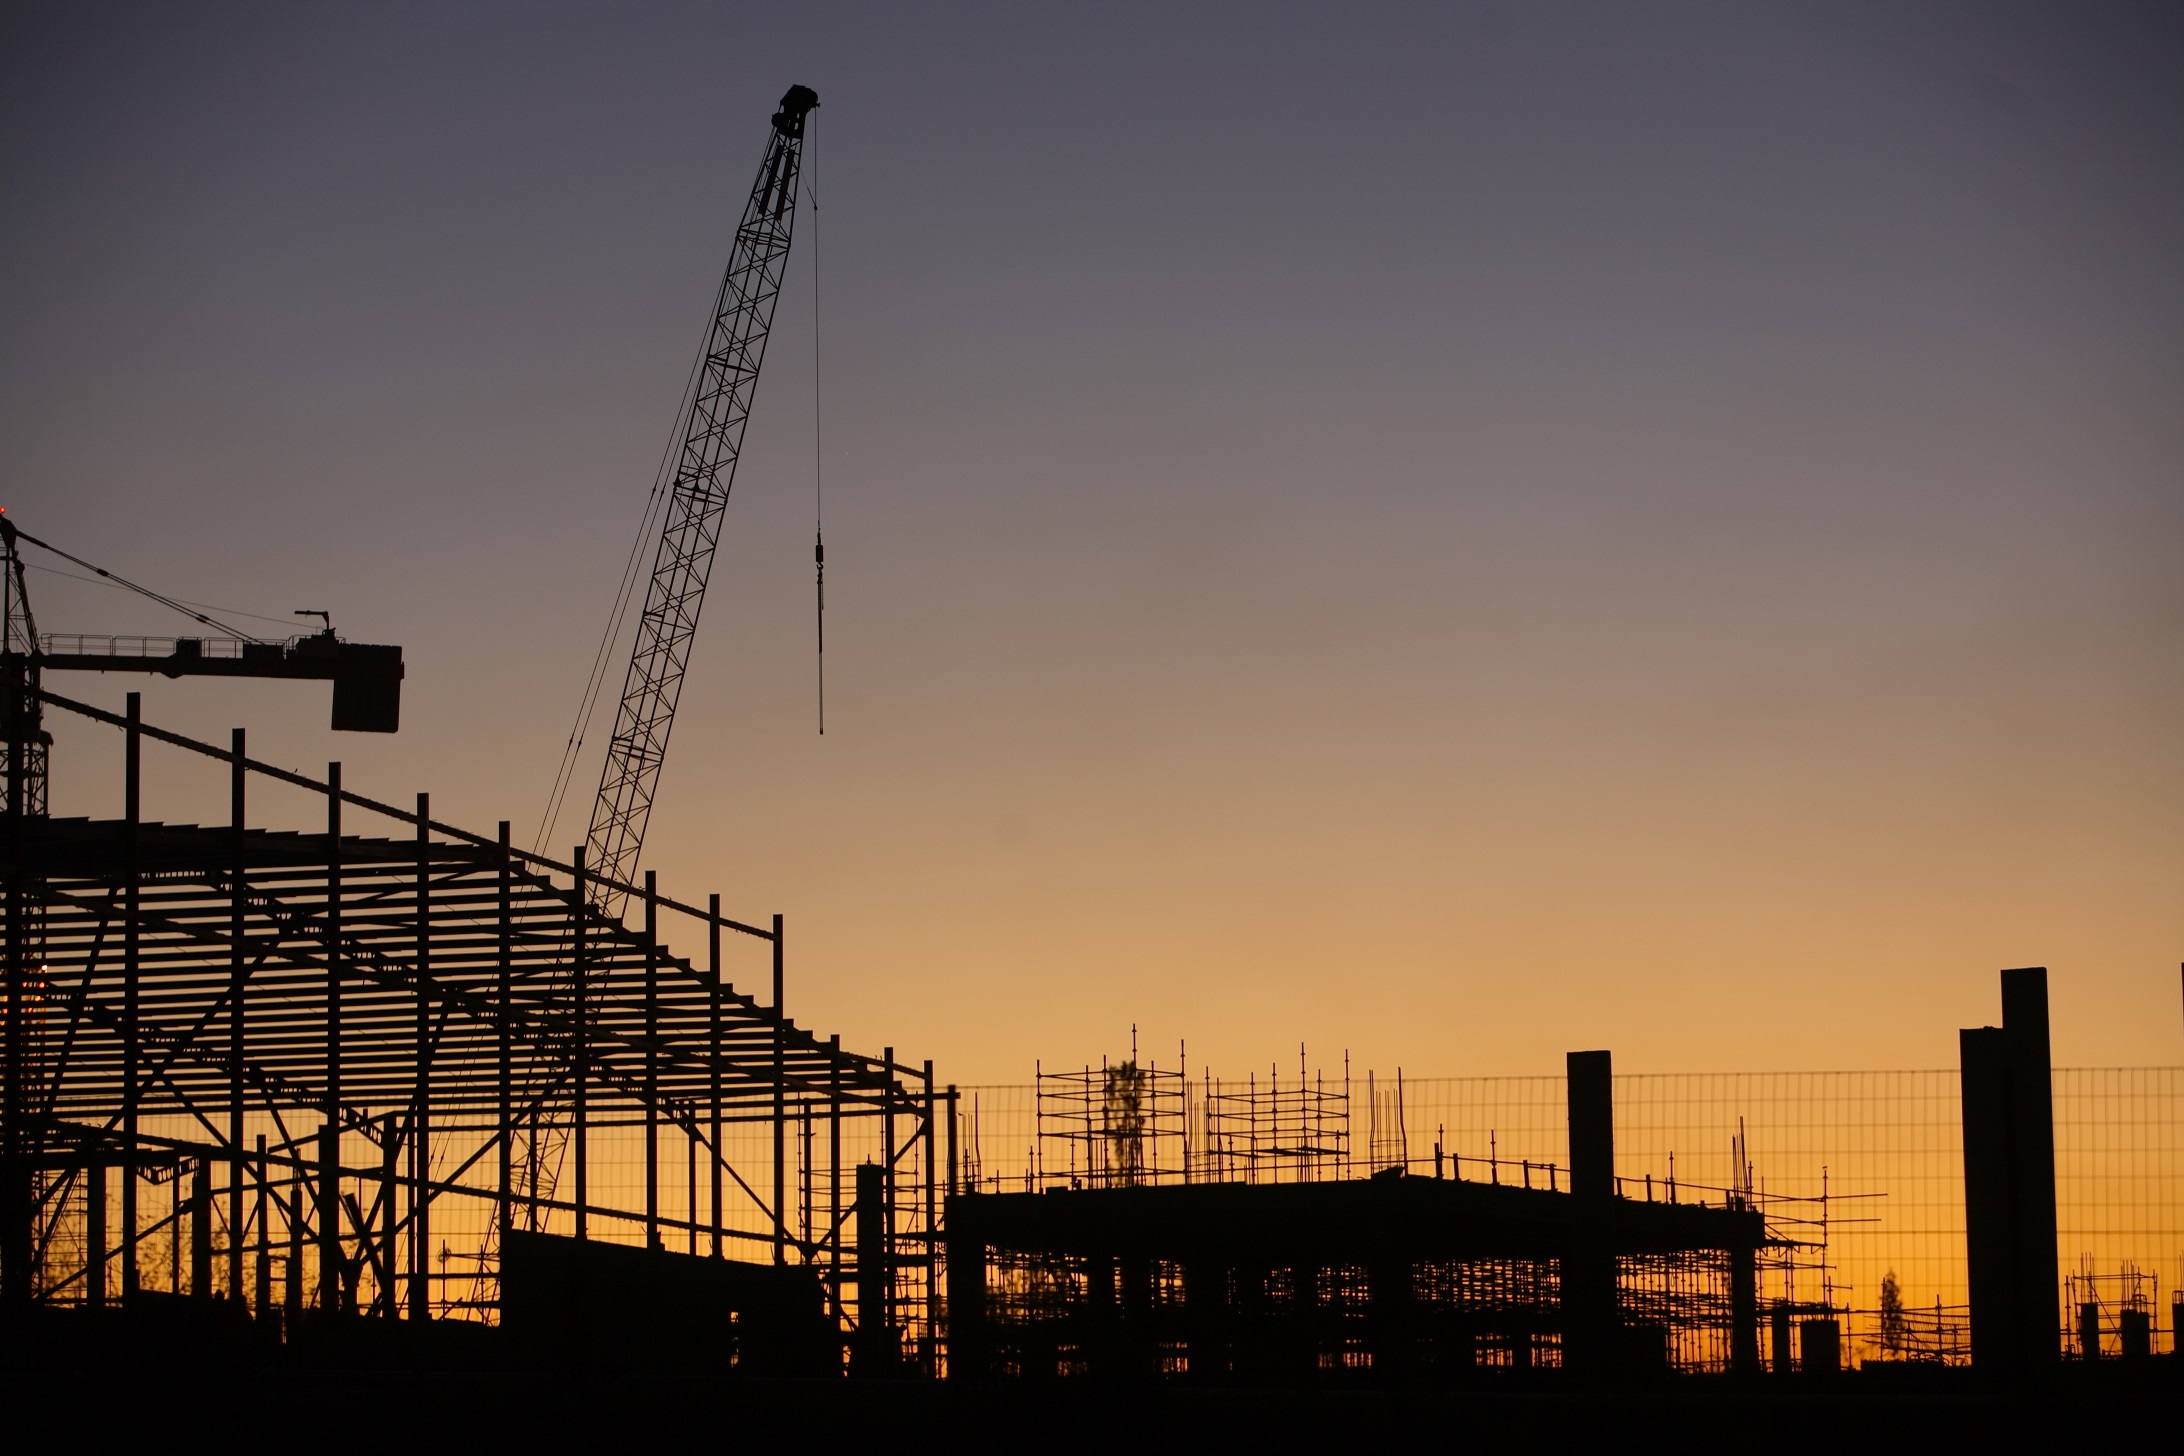 High construction material costs and labour shortages will impact global construction industry growth this year. Image: © Mark Atkins/Dreamstime.com